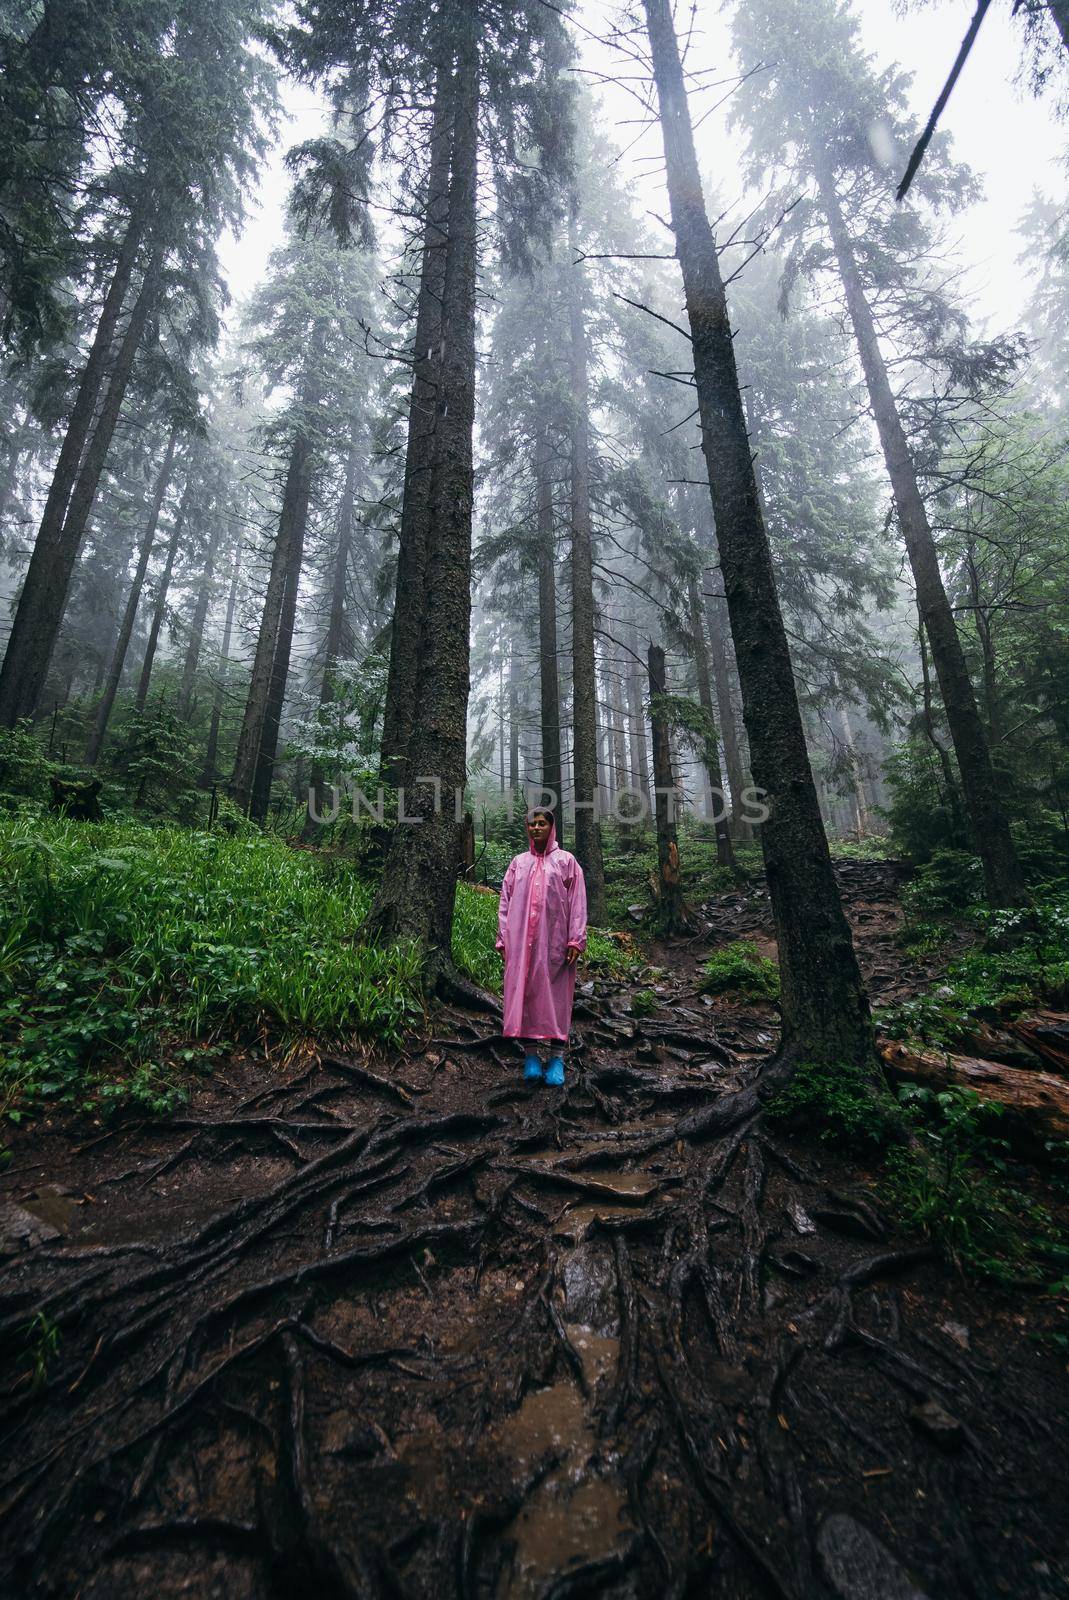 woman in raincoat walking by rainy forest